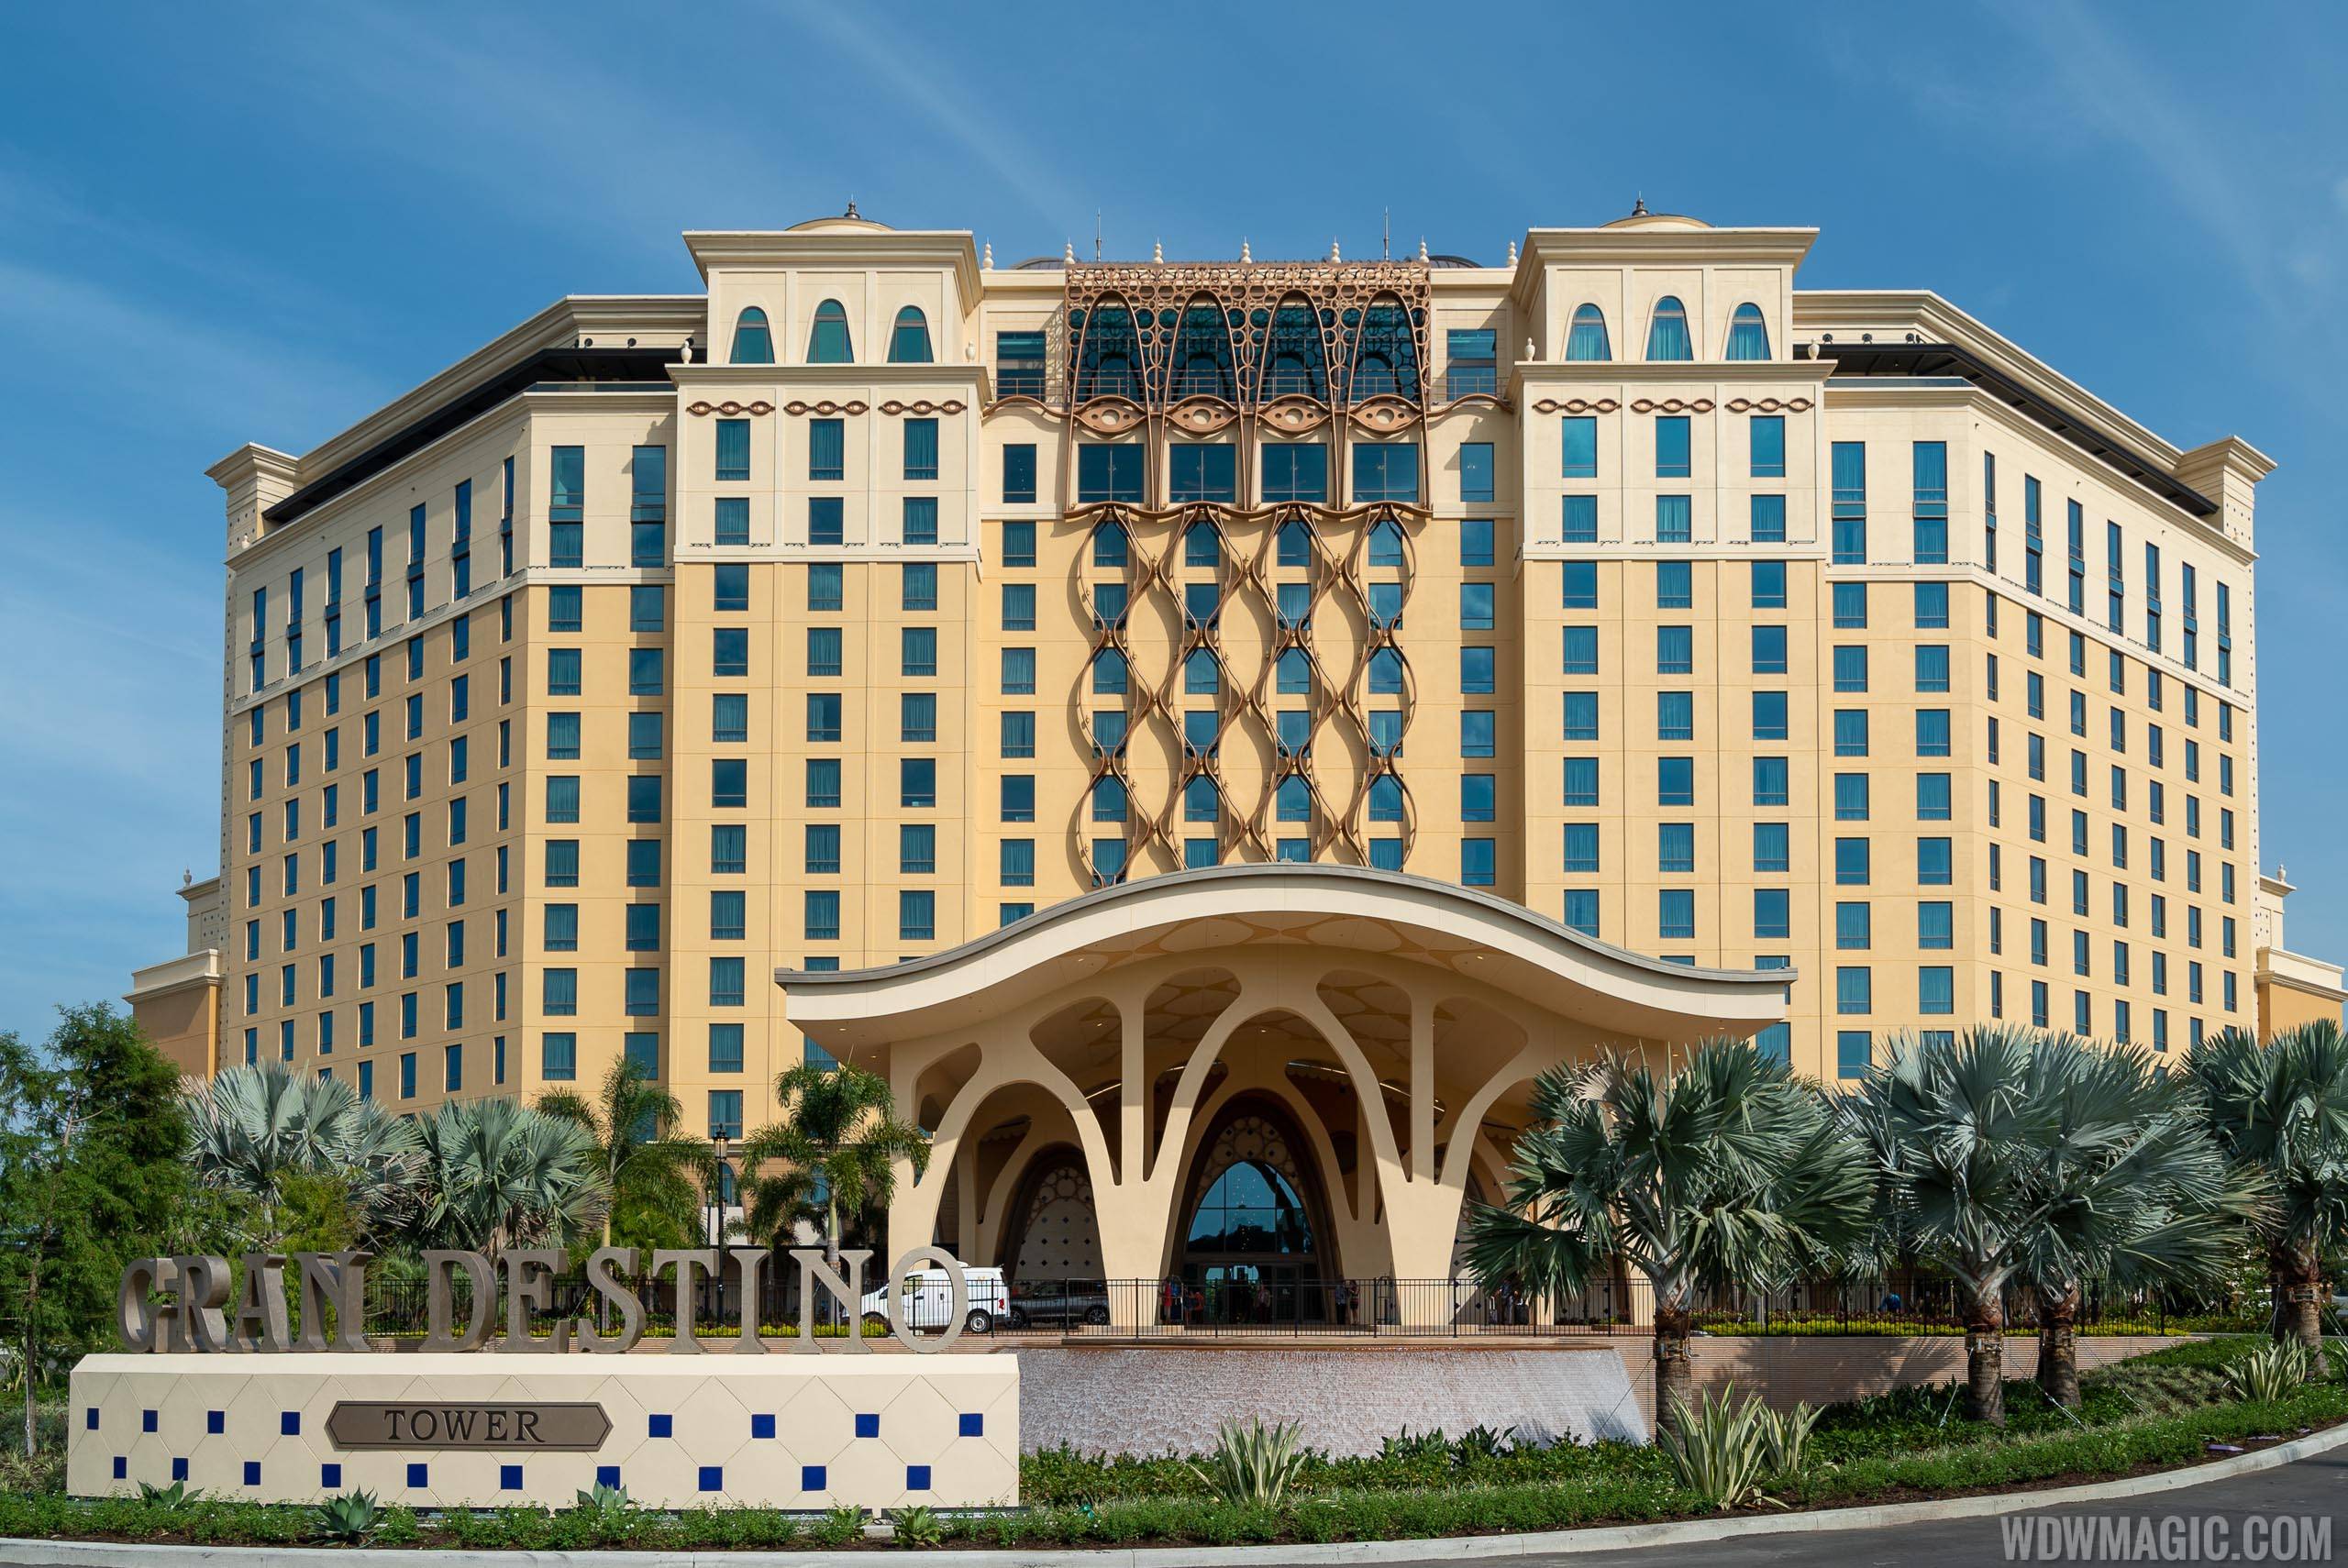 PHOTOS - Check-in, bus stops and guest services move to Gran Destino Tower at Coronado Springs Resort